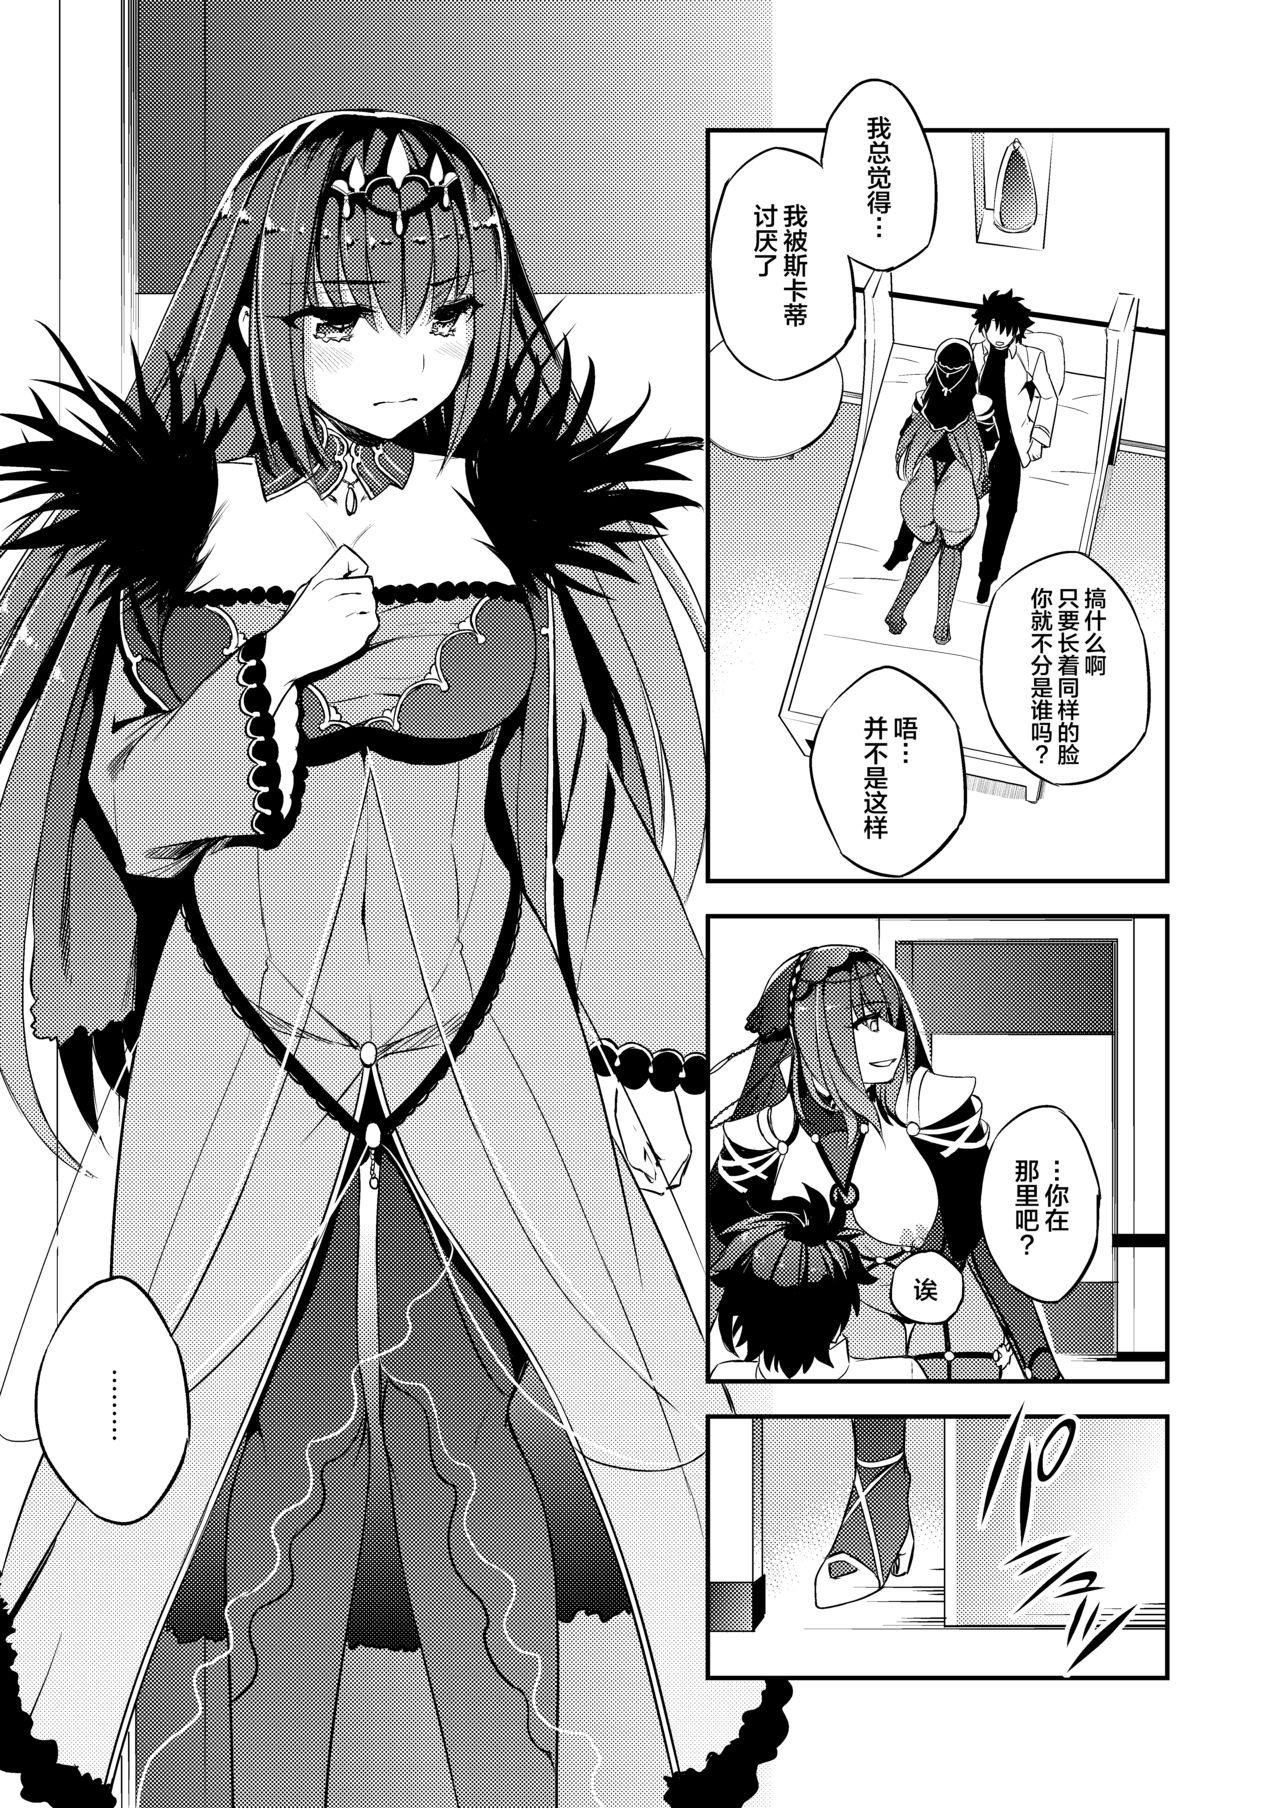 Cumload C9-39 W Scathach to - Fate grand order Glasses - Page 5